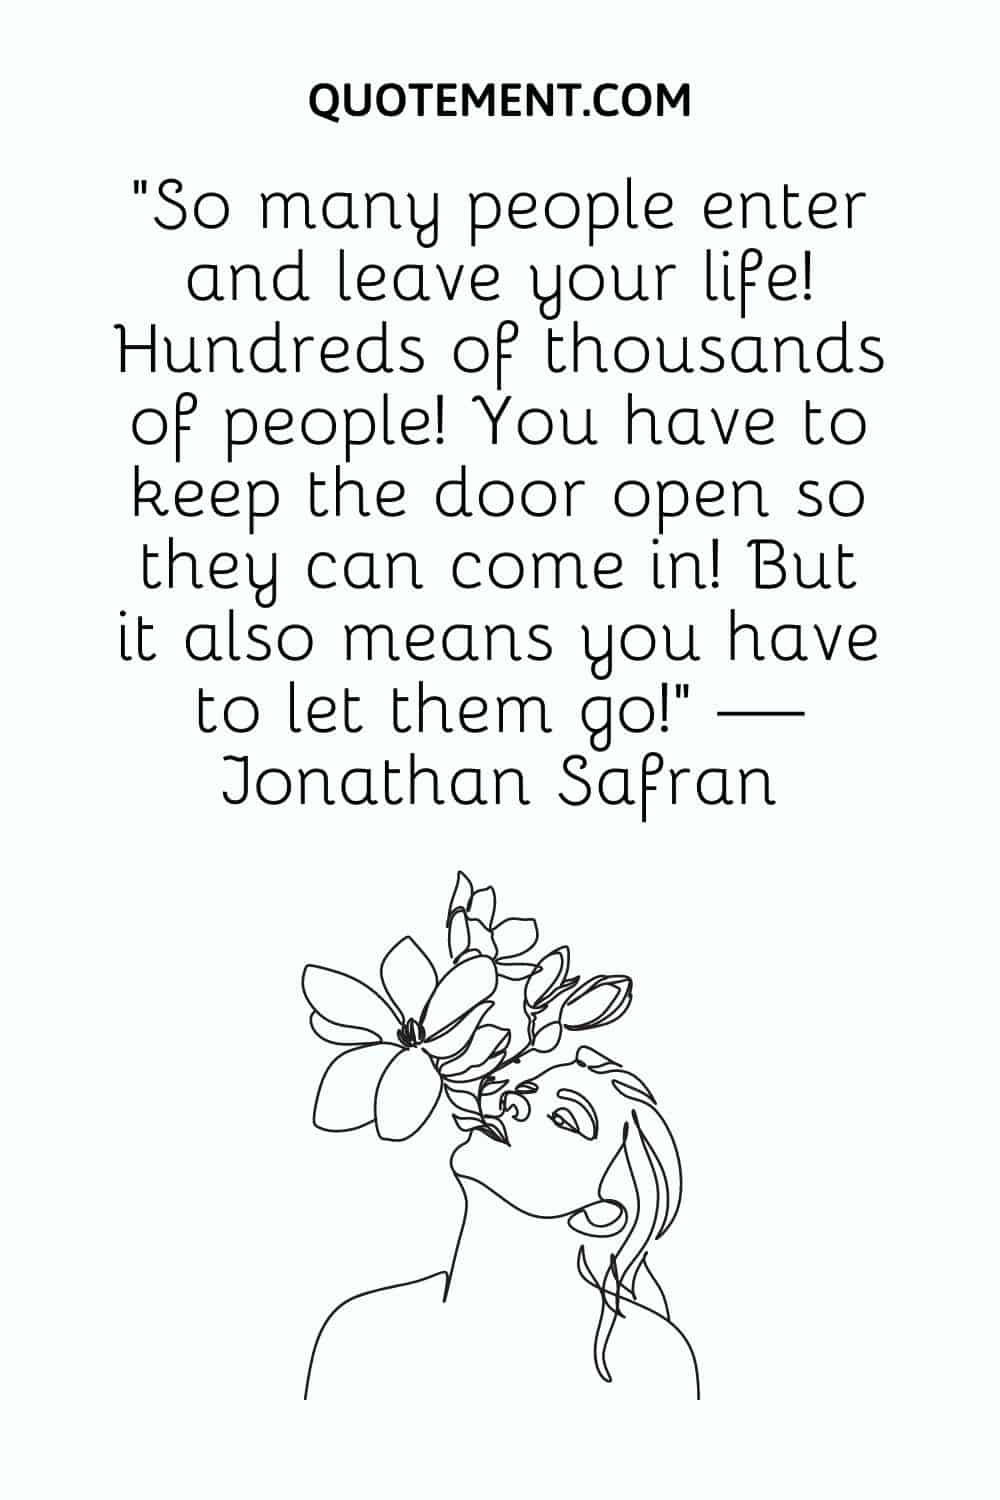 So many people enter and leave your life!